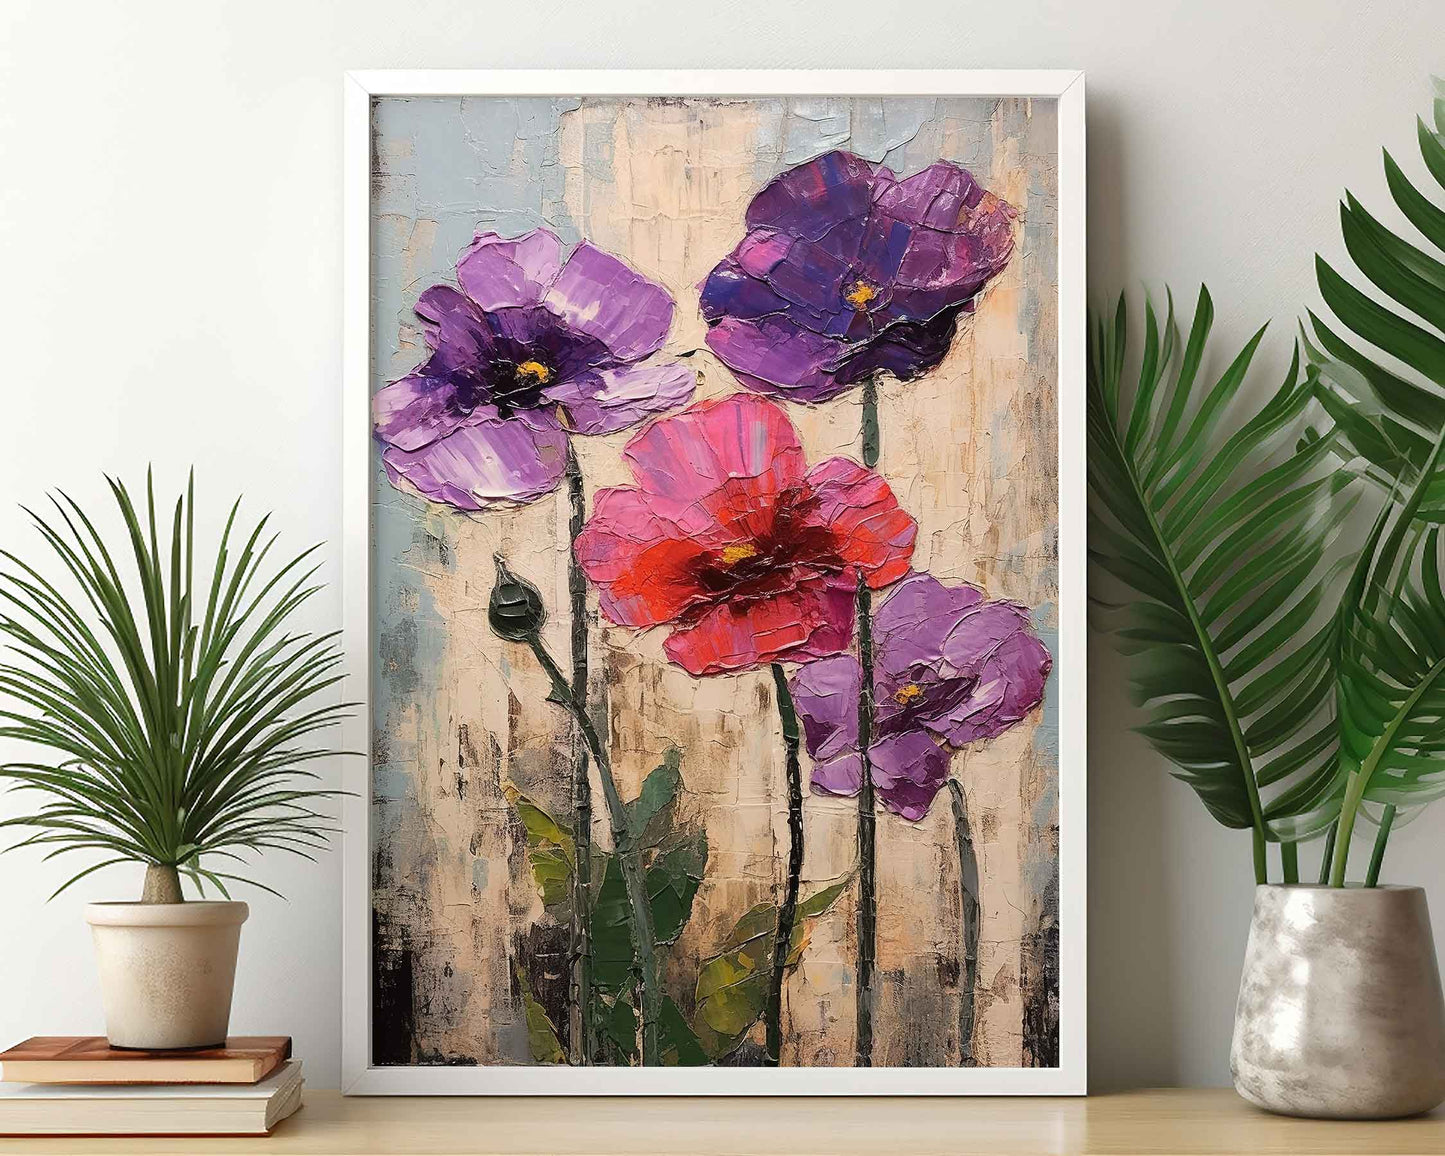 Framed Image of Colourful Flowers Oil Painting Impasto Thick Palette Wall Art Prints